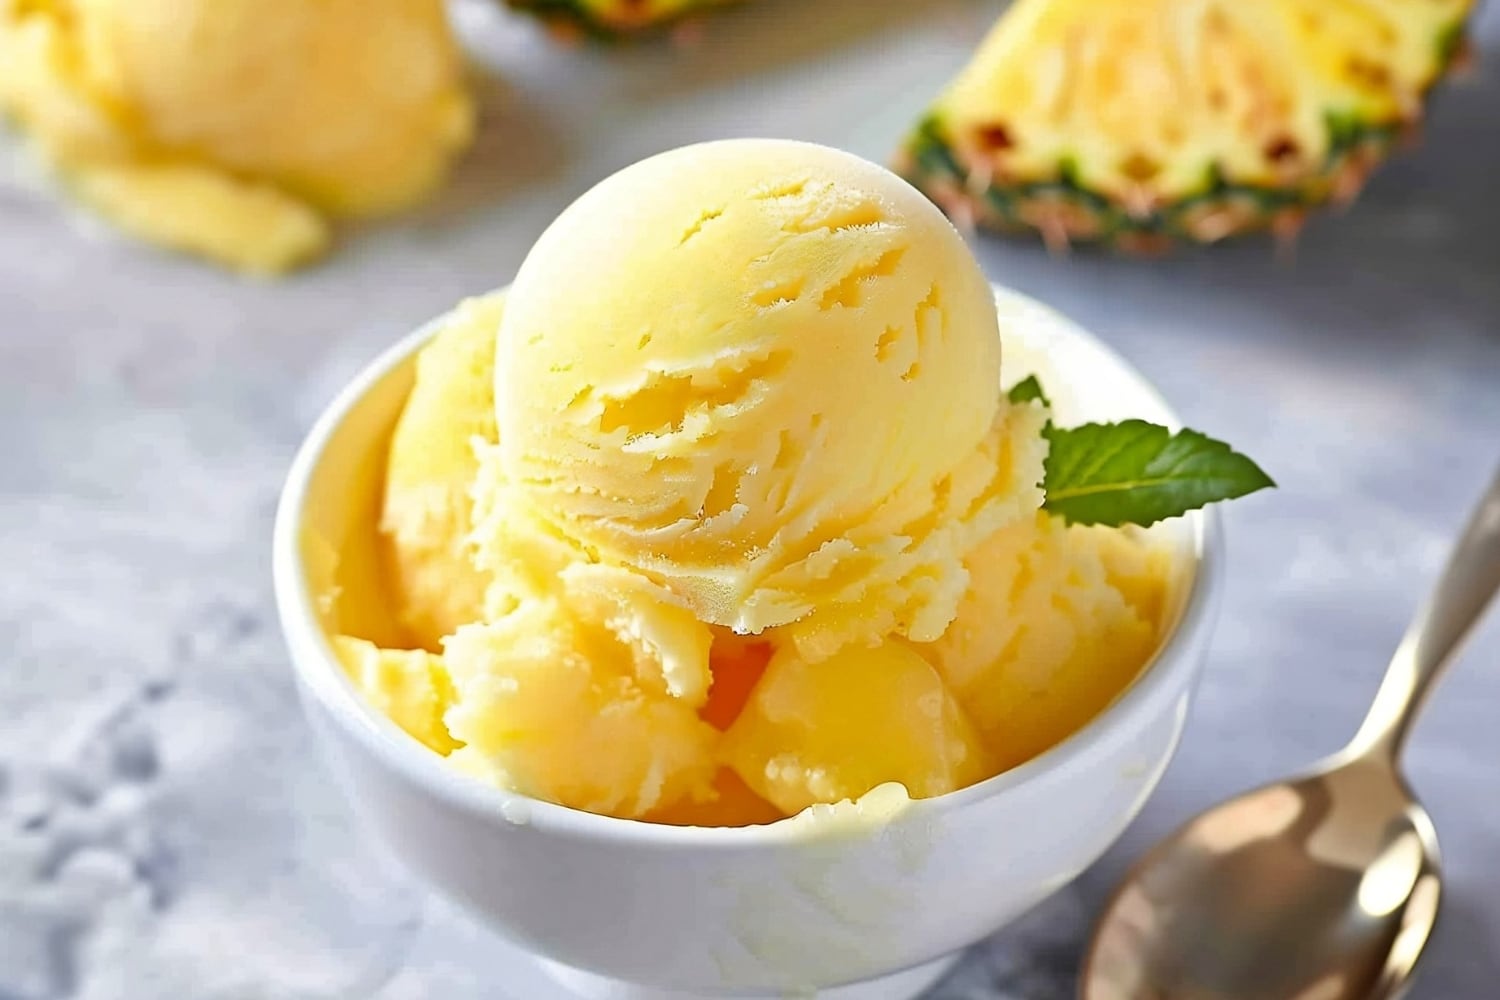 Soft and creamy yellow pineapple sorbet with mint in a bowl